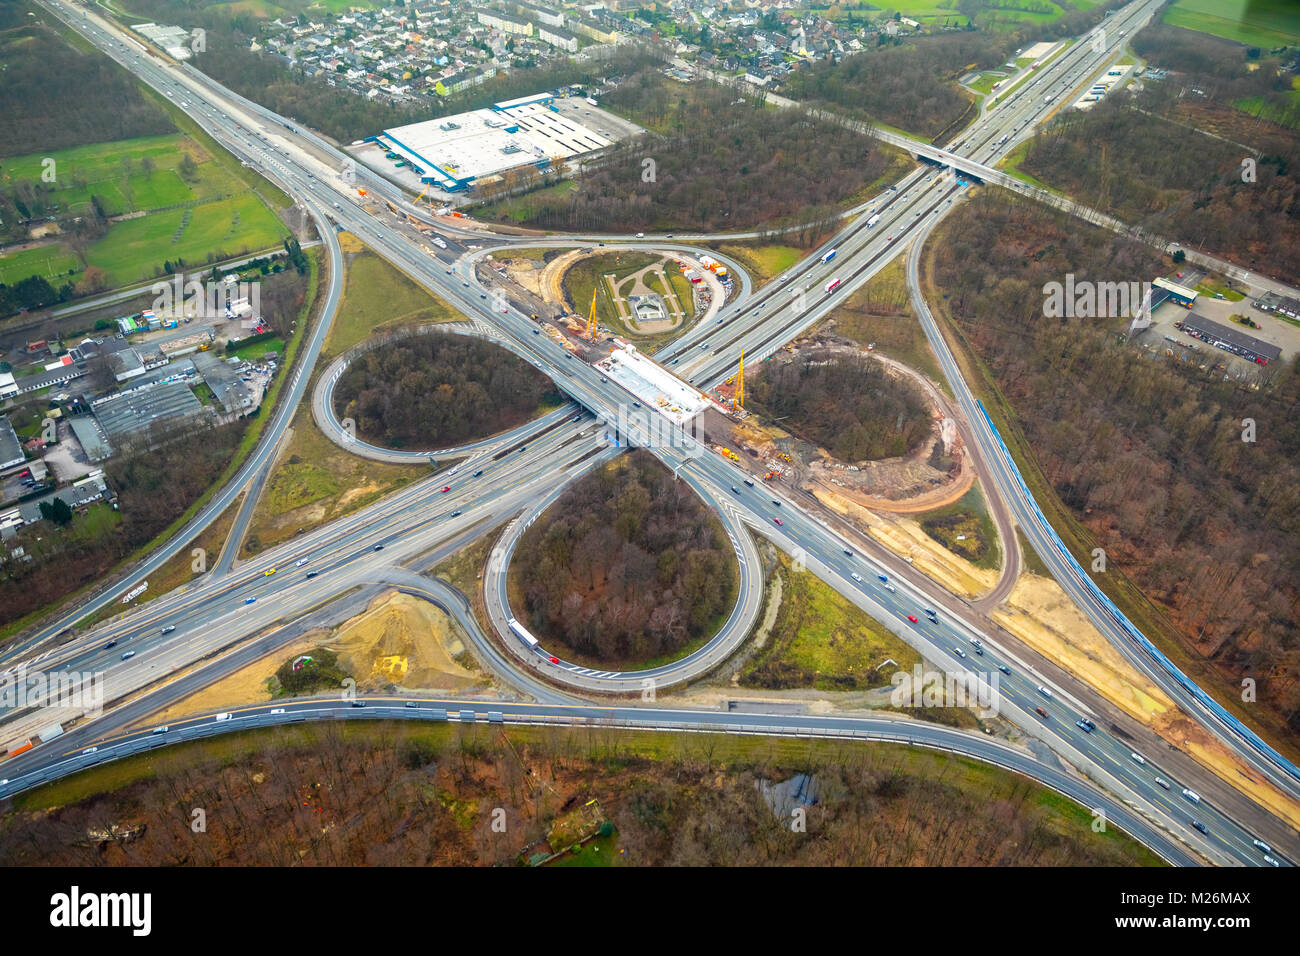 Reconstruction of the interchange Recklinghausen with the motorways A43 and A2. This aerial photograph shows the trefoil the highway junction in Reckl Stock Photo